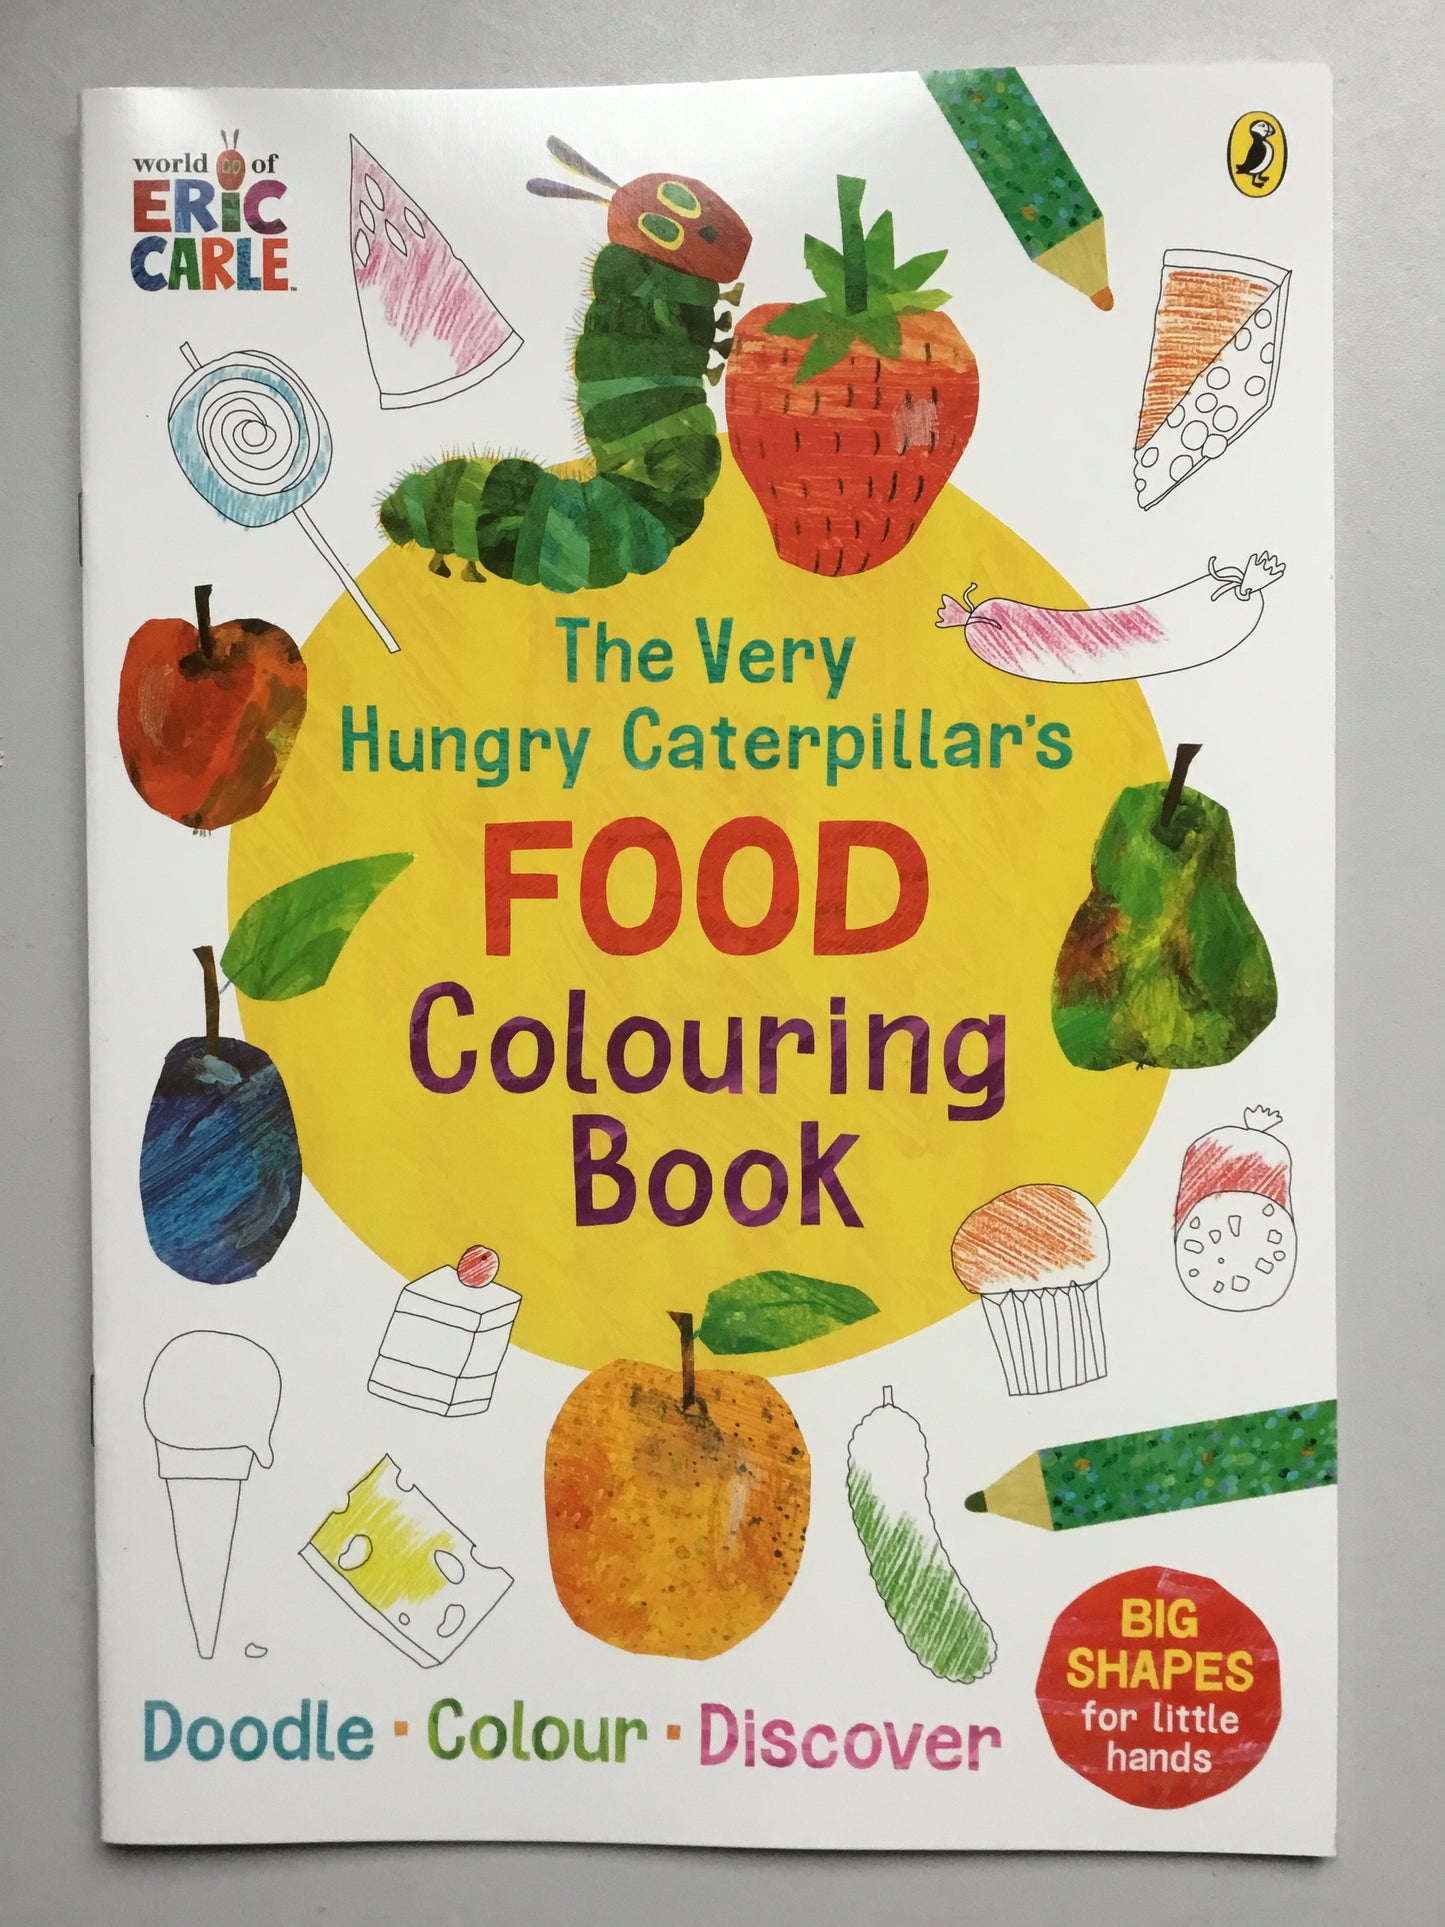 Eric Carle The Very Hungry Caterpillar’s Food Colouring Book